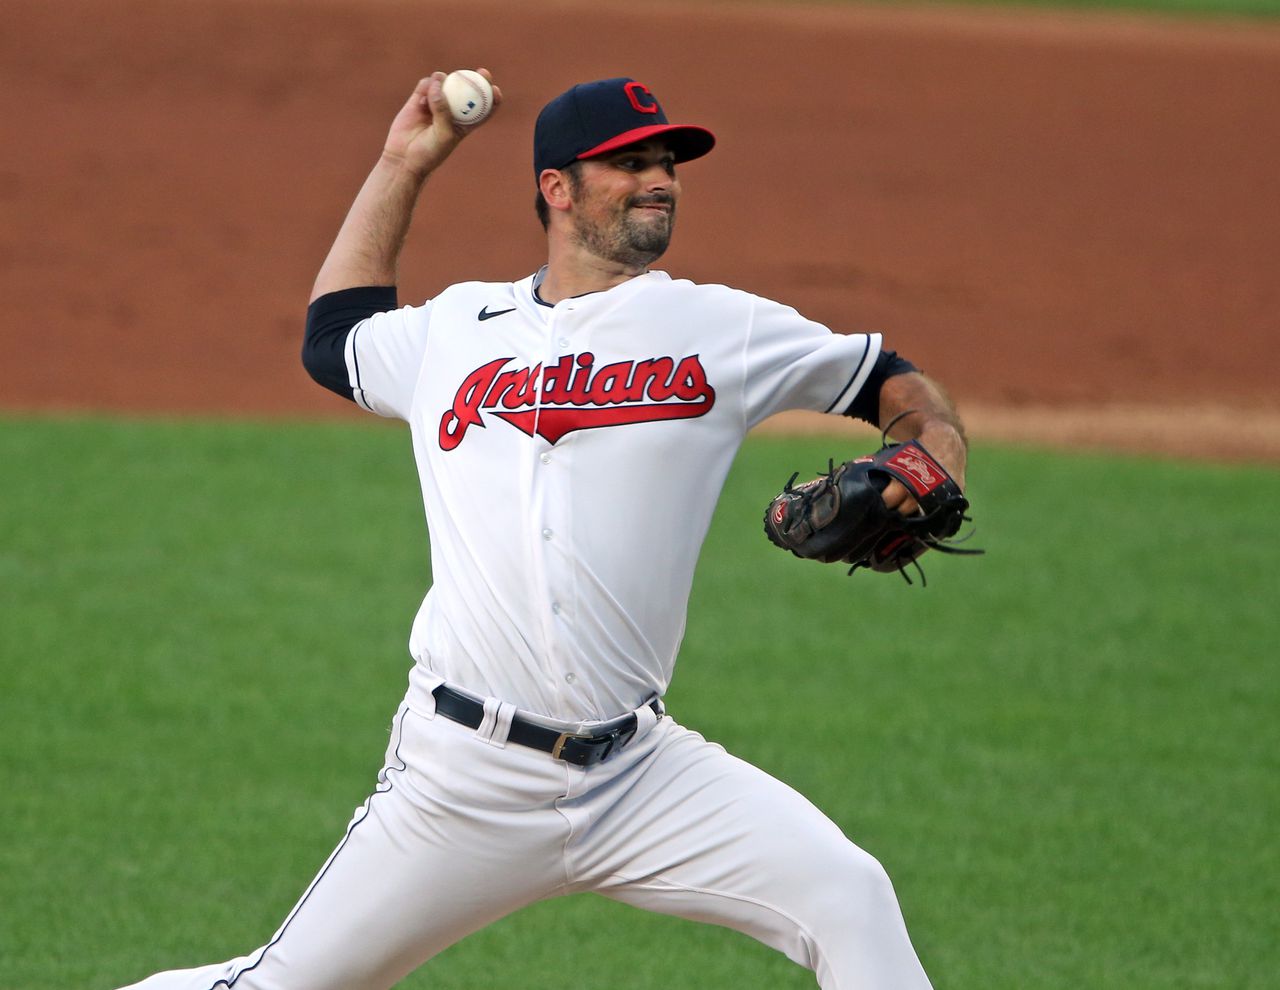 Cleveland Indians comprehensive doubleheader sweep of Chicago White Sox with 5-3 gain